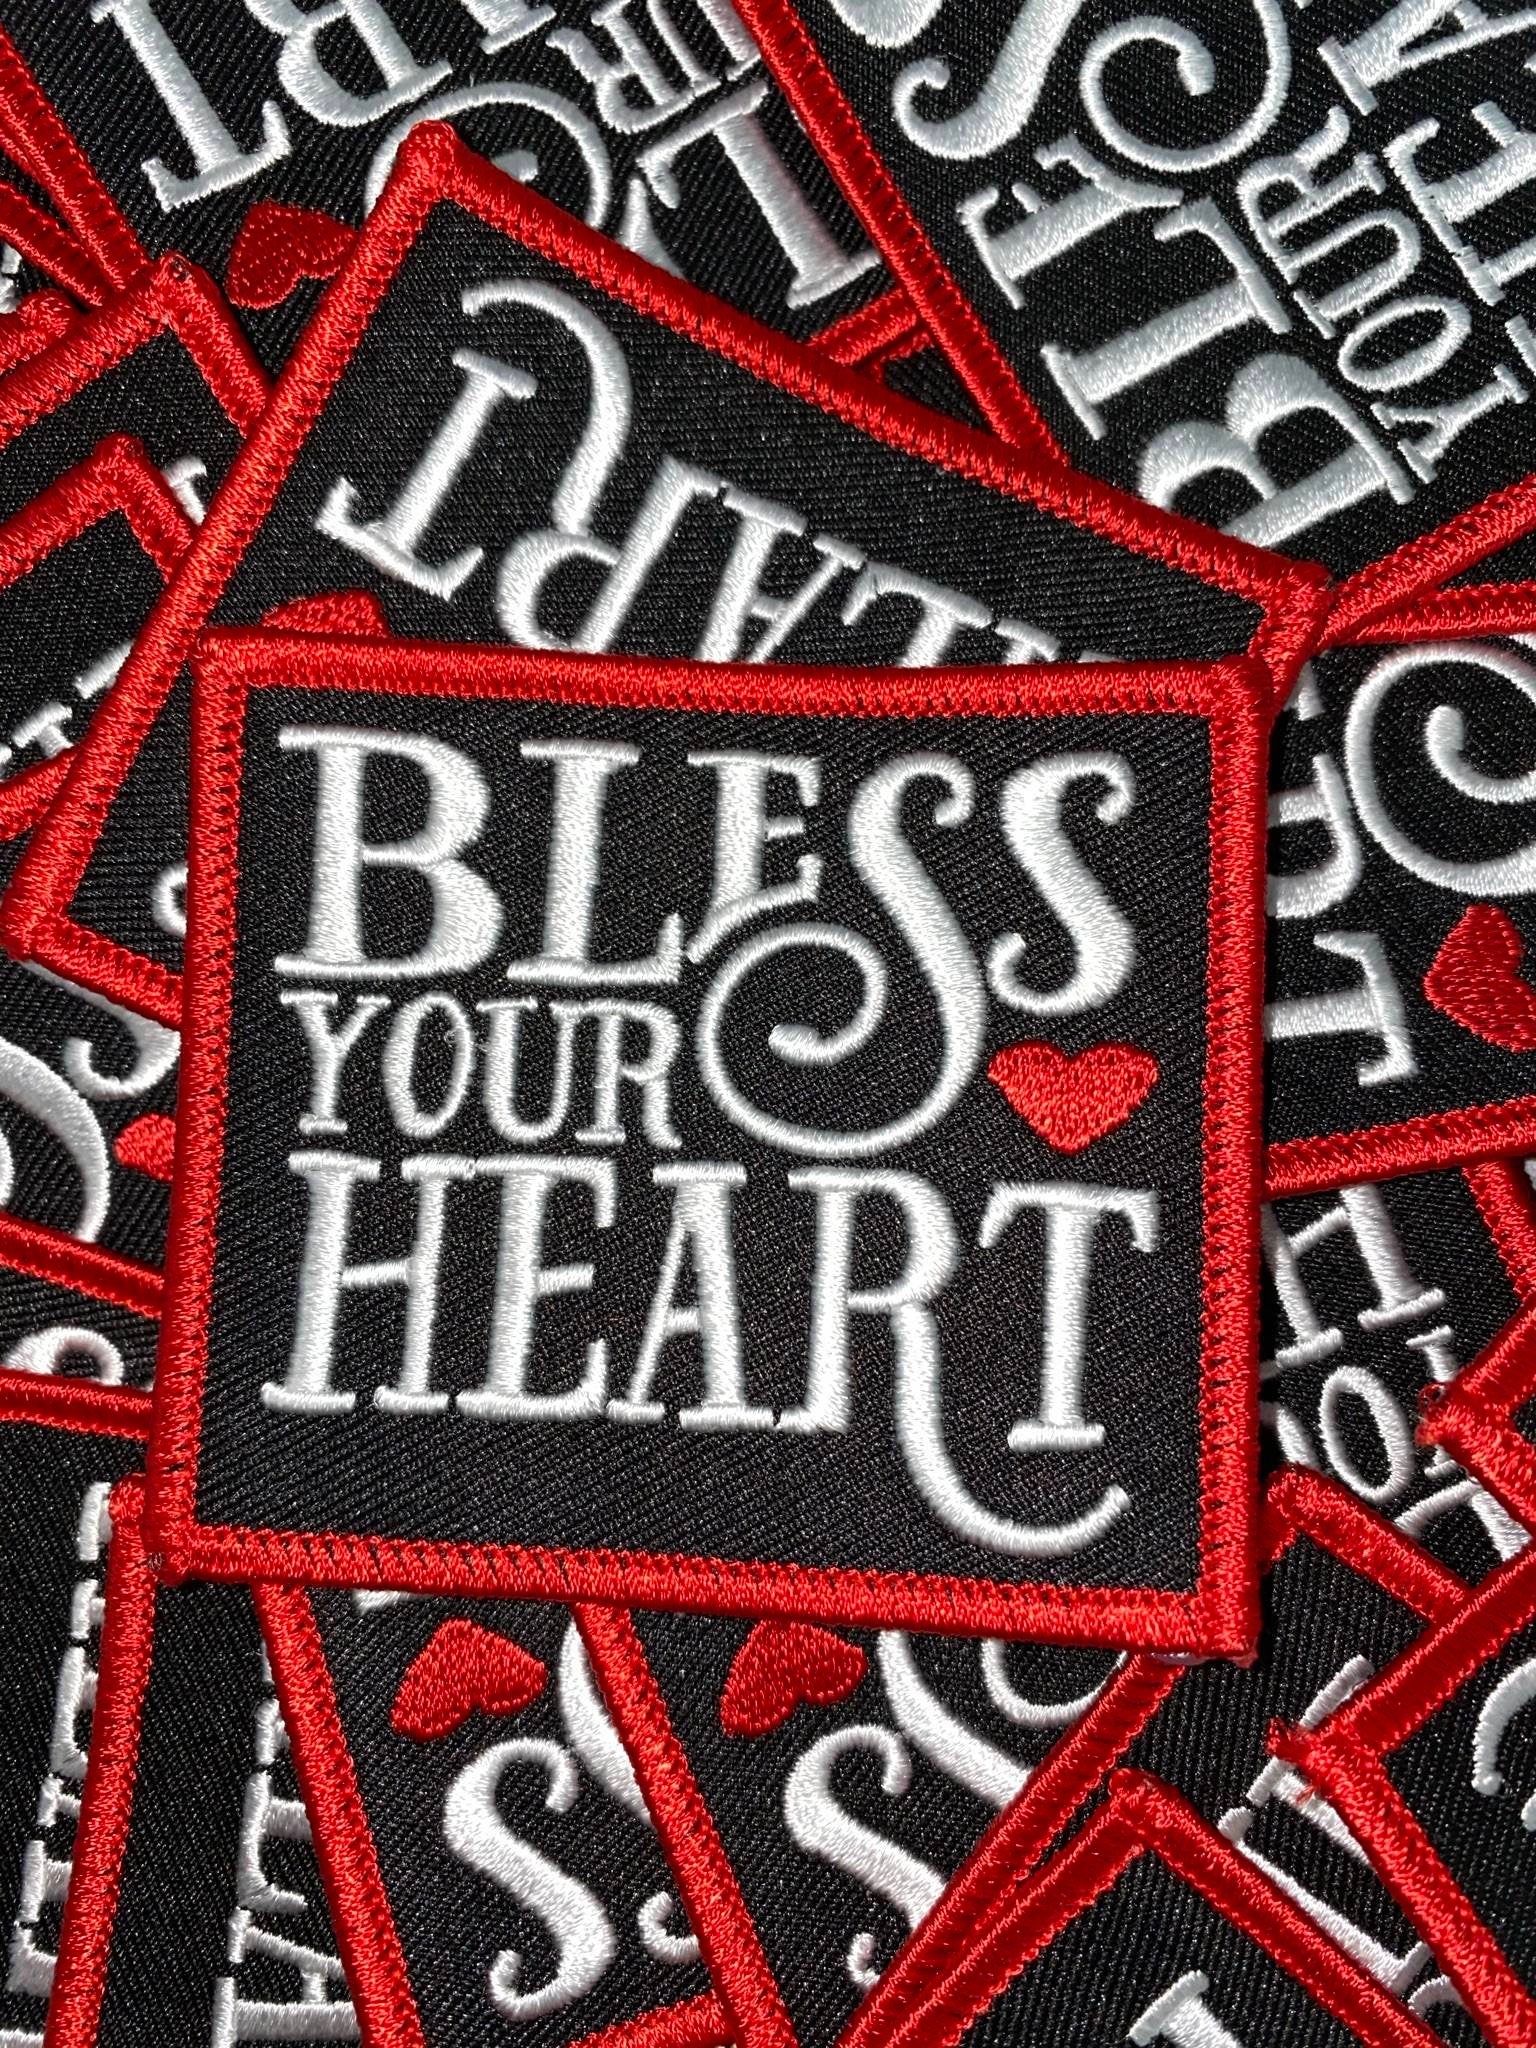 NEW Arrival "Bless Your Heart", Cute Inspirational Applique, Iron-on Embroidered Patch, Embroidery Design, Size 4", Small Jacket Patch, DIY